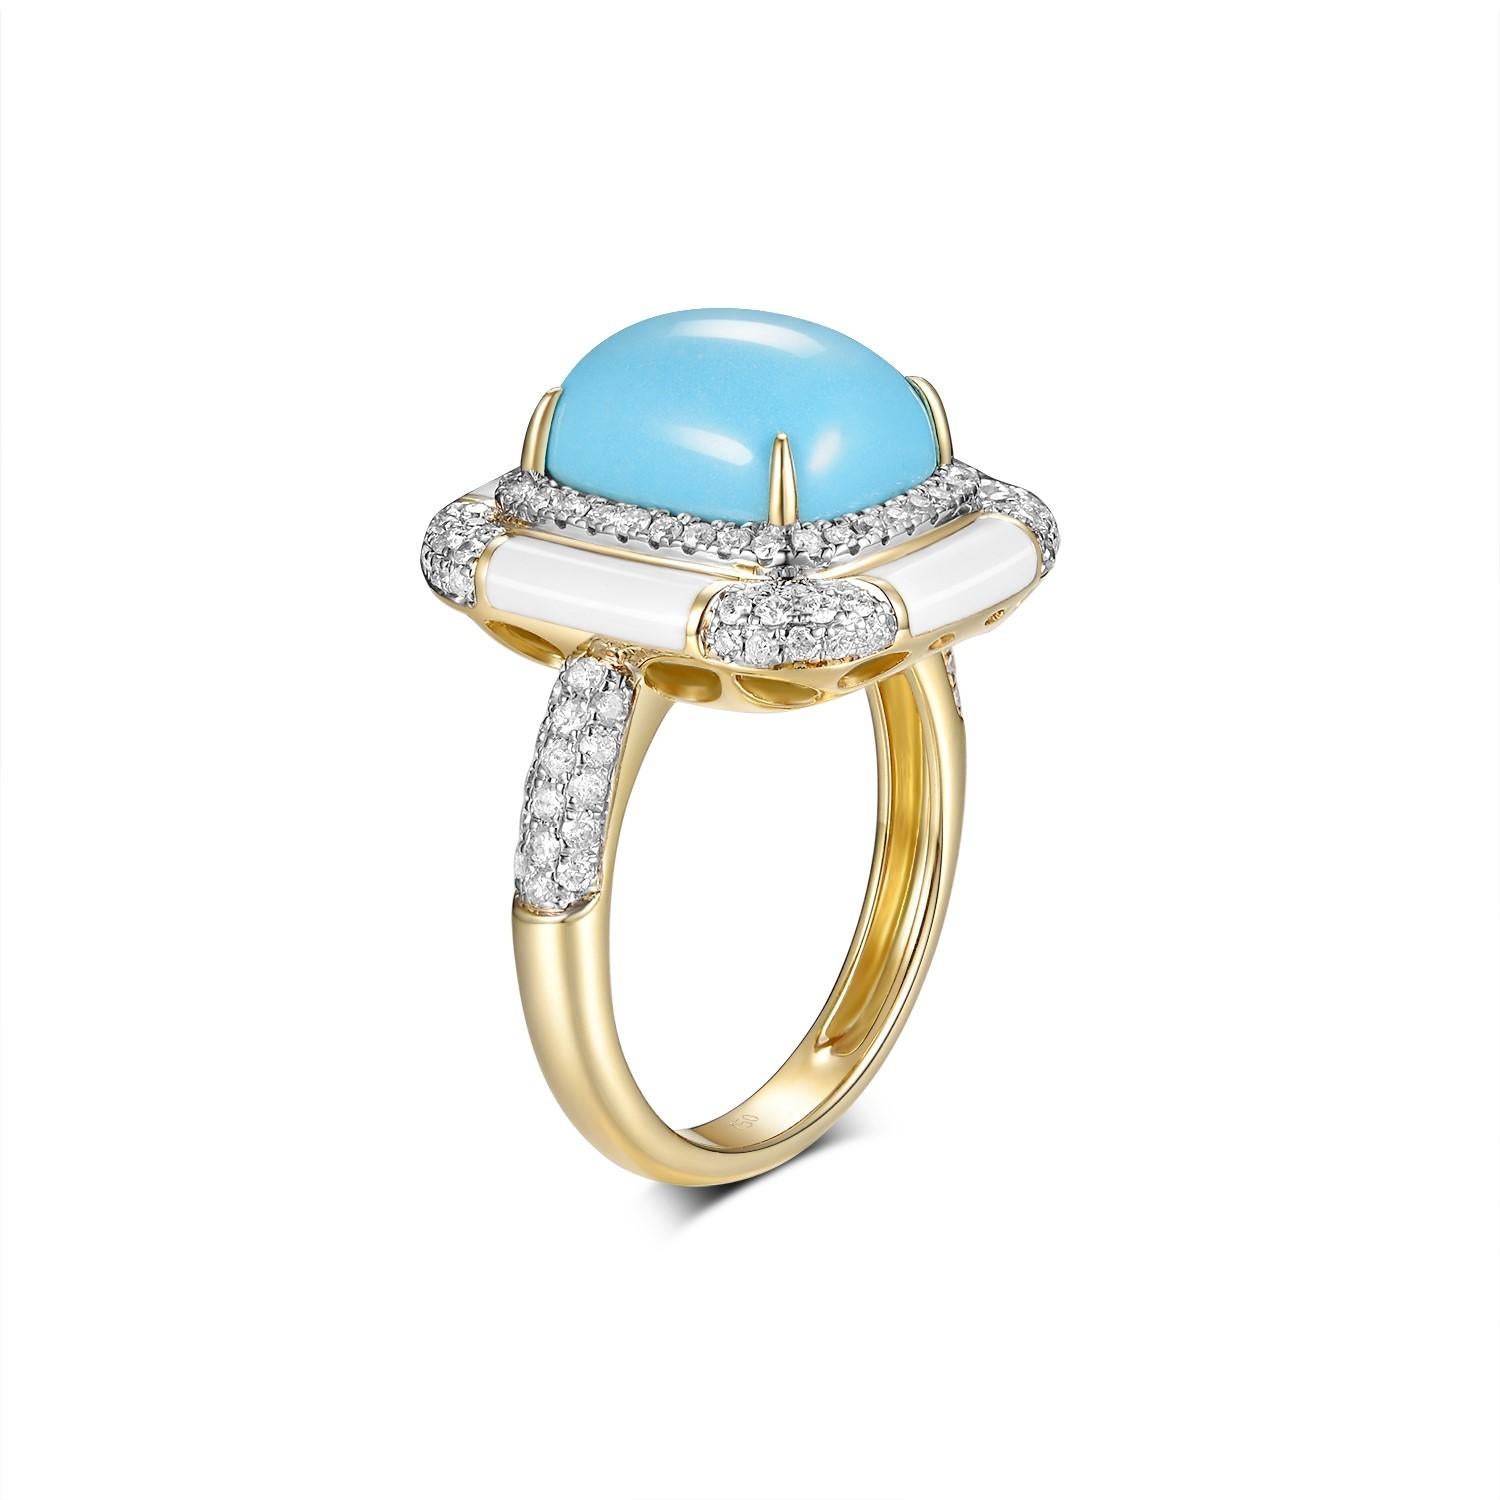 This exquisite ring showcases a cushion sugarloaf-cut turquoise, weighing a substantial 4.25 carats, with a stone size of 11.15 x 9.15 mm. The vivid blue hue of the 100% earth-mined gemstone is framed by a halo of dazzling diamonds, weighing a total